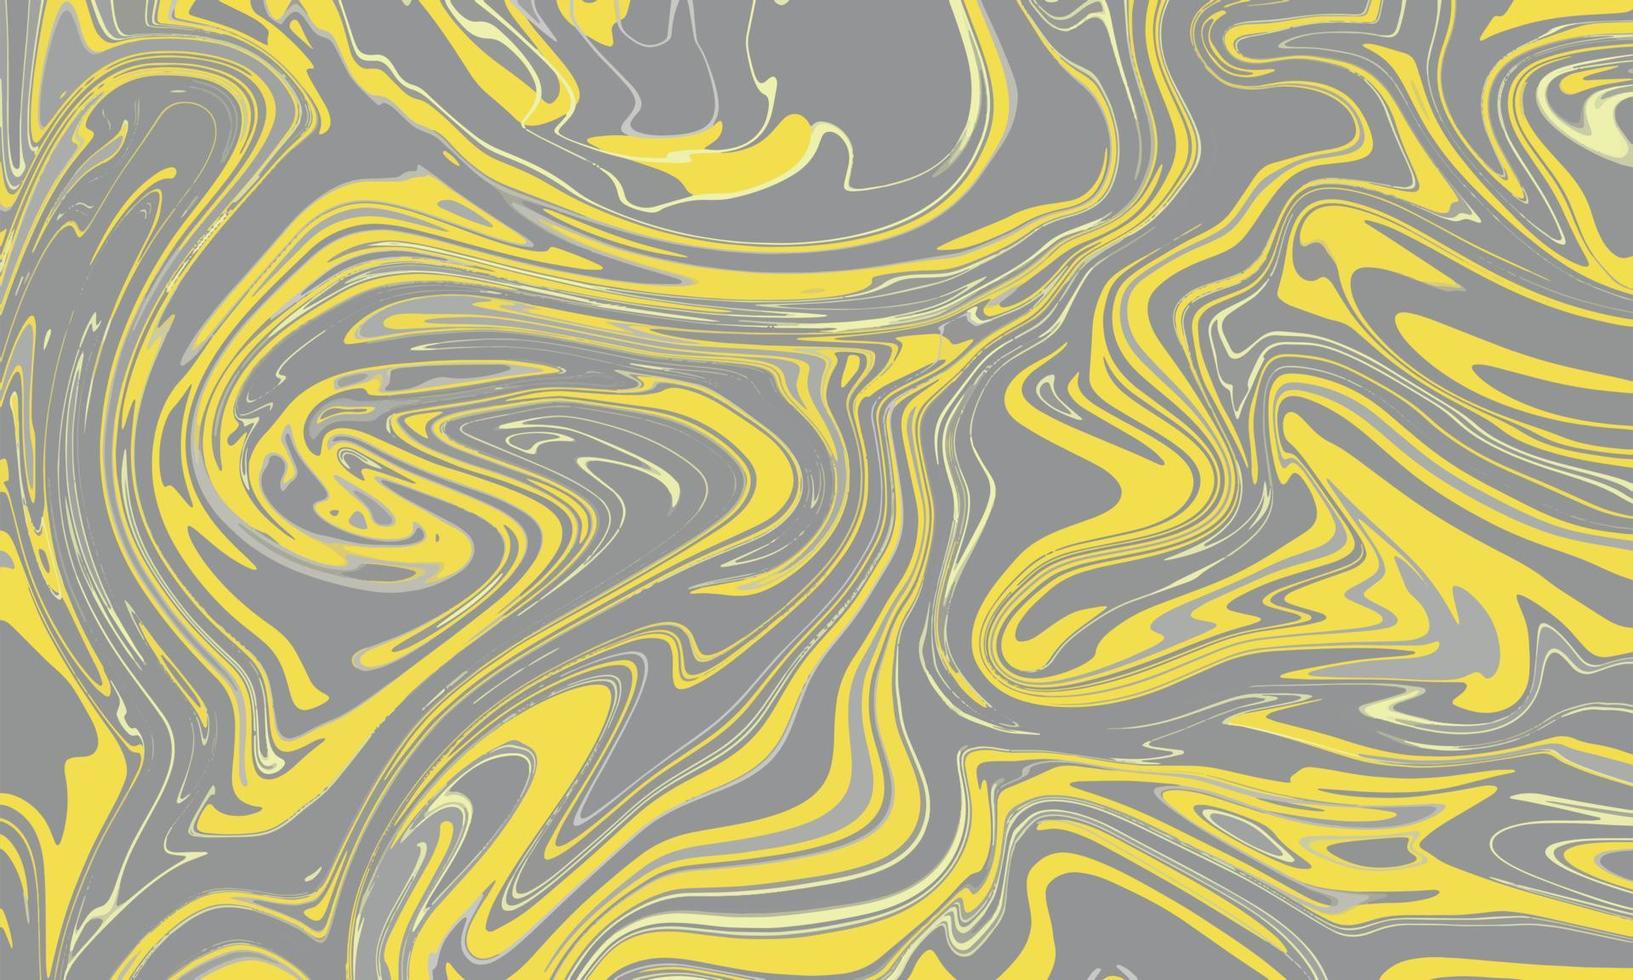 Fluid and Dynamic Marbleized Abstract Background with Organic Lines and Modern Geometric Abstraction in Bright and Playful Colors - Perfect for Websites, Apps, and More vector